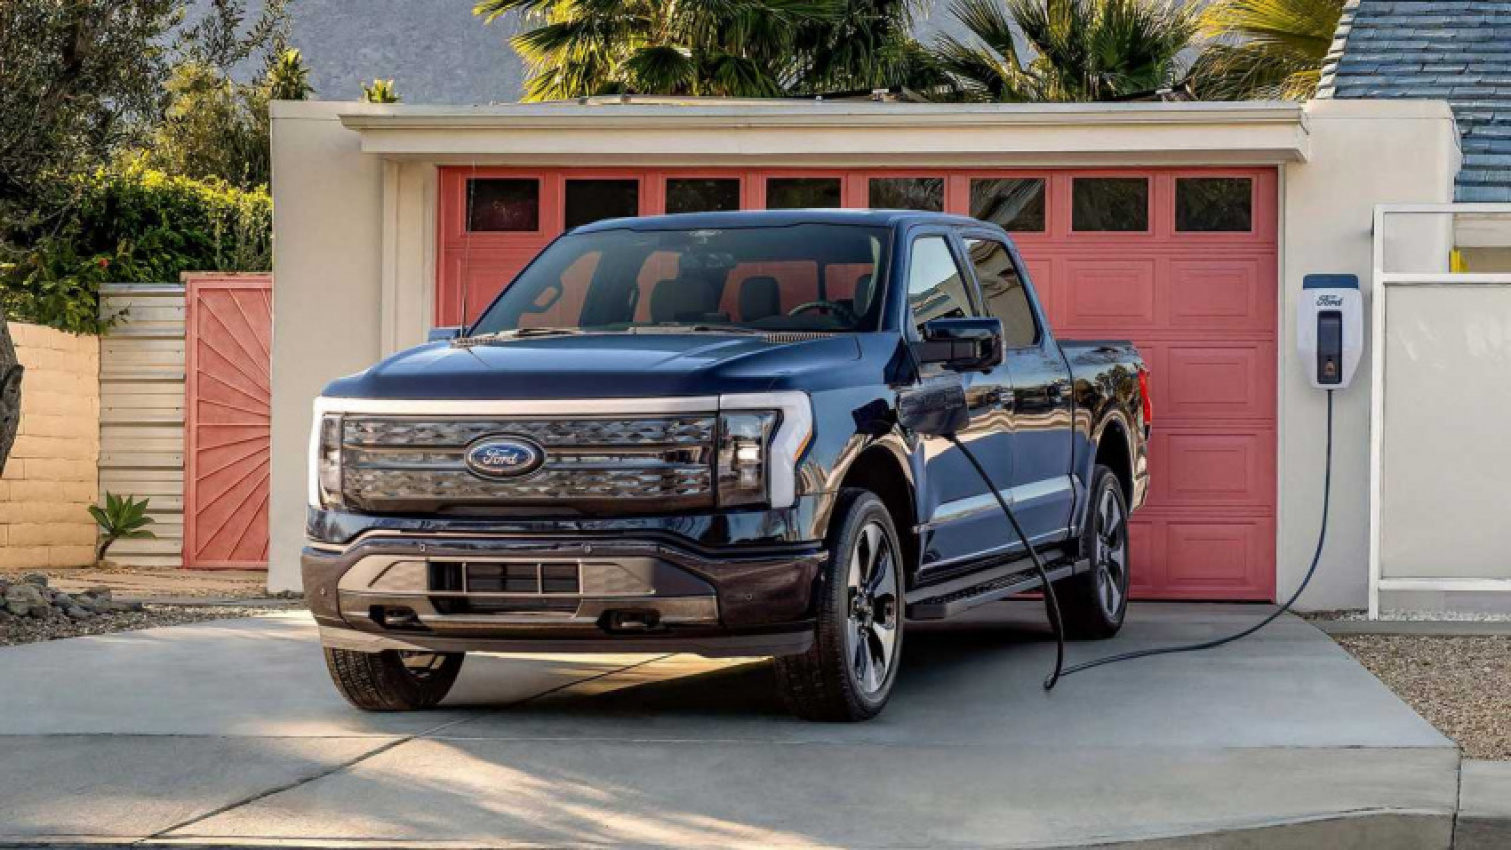 autos, cars, evs, ford, ford dealer memo: $25k fine for selling f-150 lightning demos early